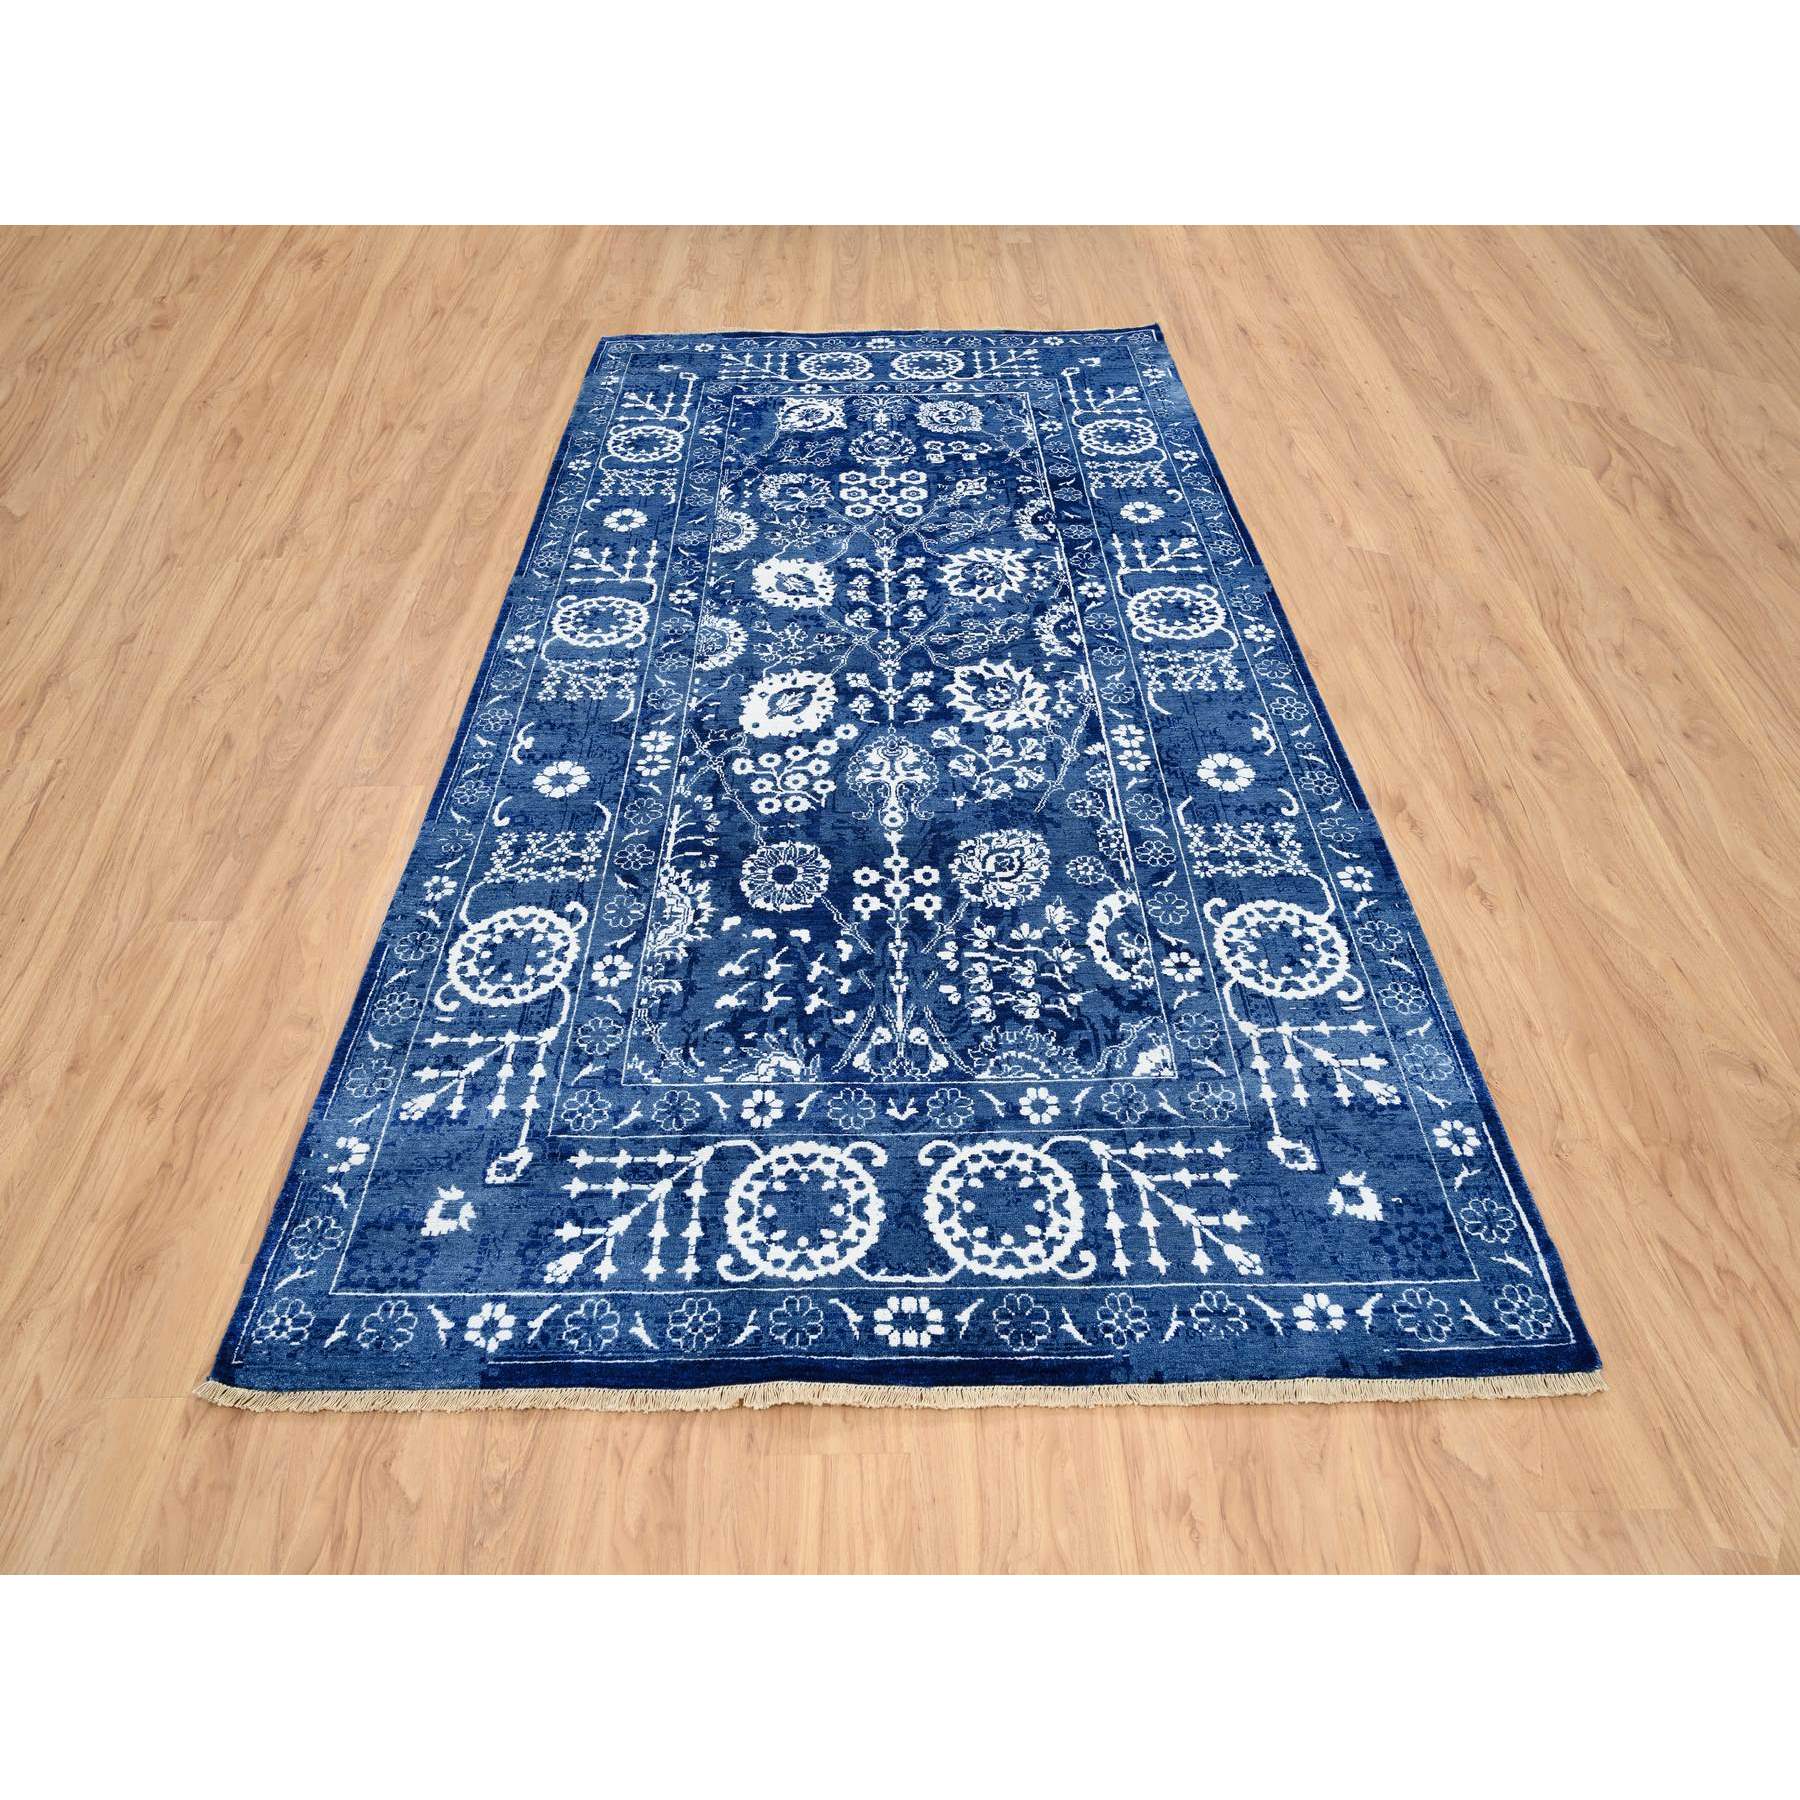 6'3"x12' Denim Blue, Tone on Tone Wool and Silk, Hand Woven Tabriz with All Over Motifs, Gallery Size Runner Oriental Rug 